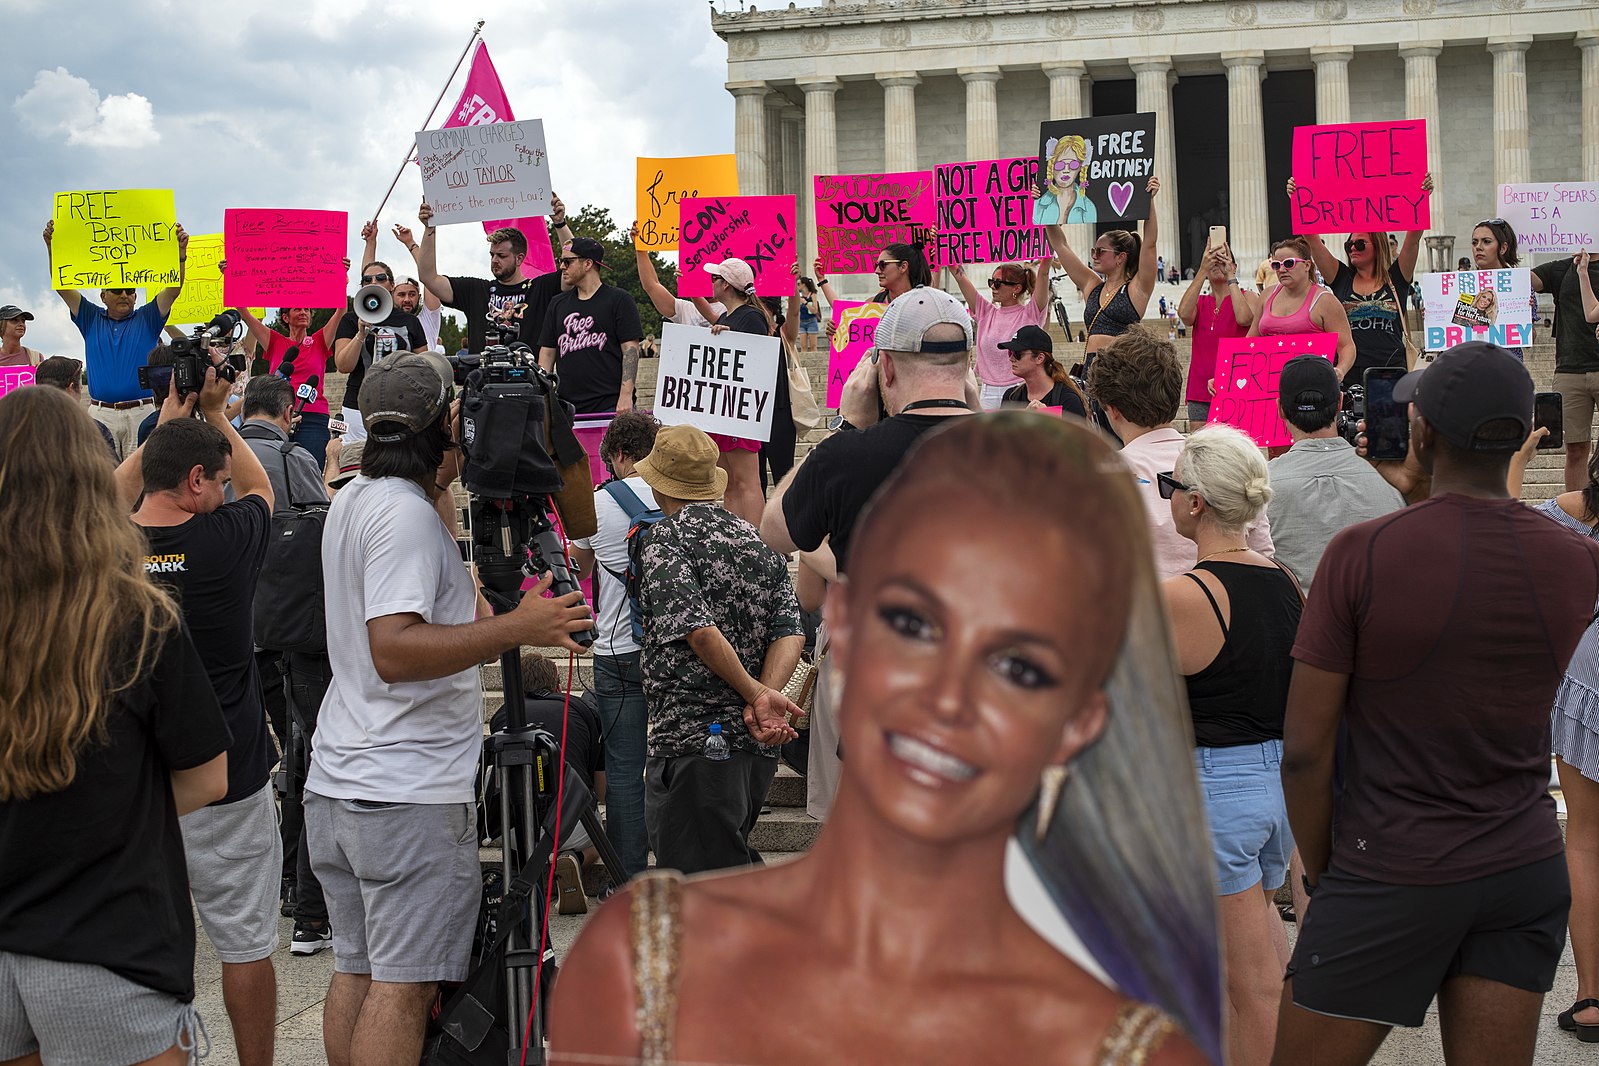 Free Britney Spears protest